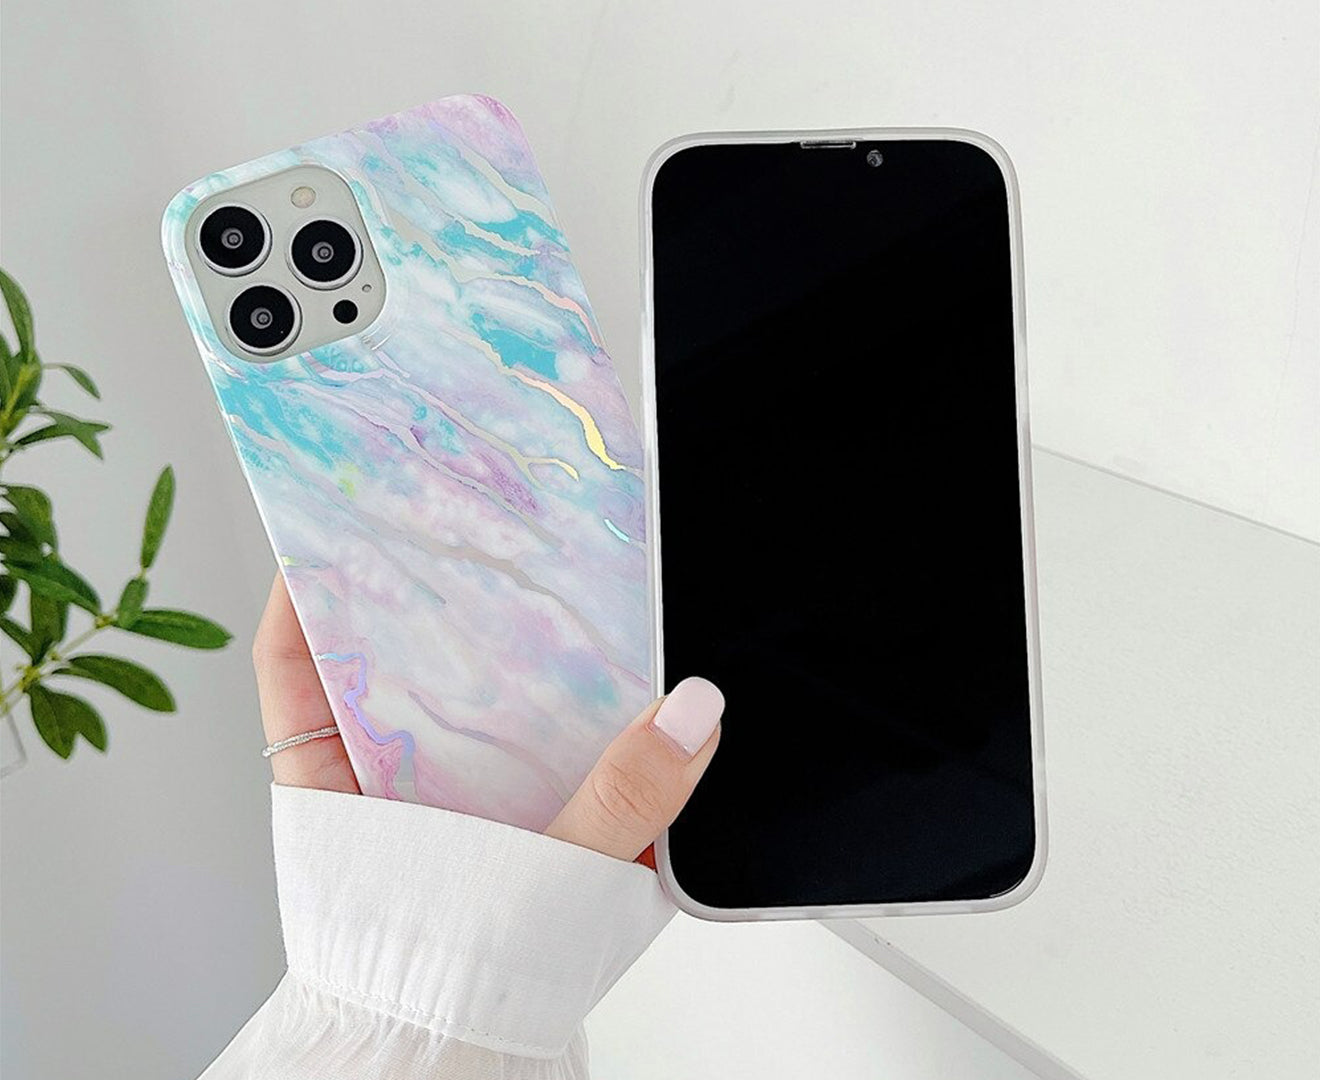 Anymob iPhone Case Sparkle Blue Marble Pattern Soft Silicone Cover For iPhone 13 11 12 Pro Max X XR XS Max 7 8 Plus SE 2020-Mobile Phone Cases-PEROZ Accessories